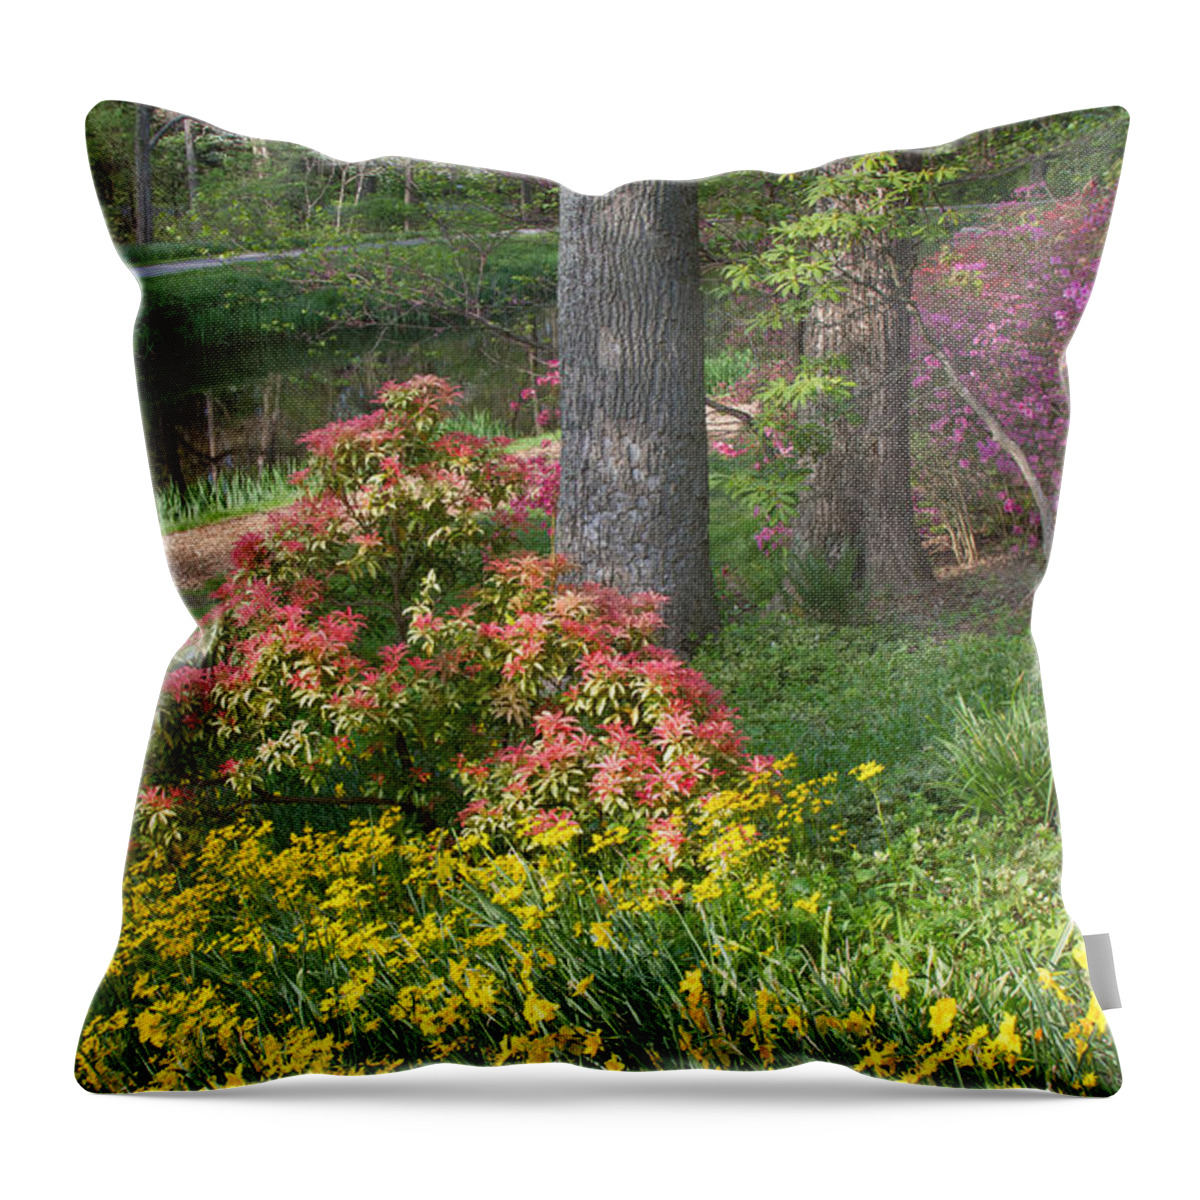 Spring Landscapes Throw Pillow featuring the photograph Brookside Gardens 8 by Chris Scroggins